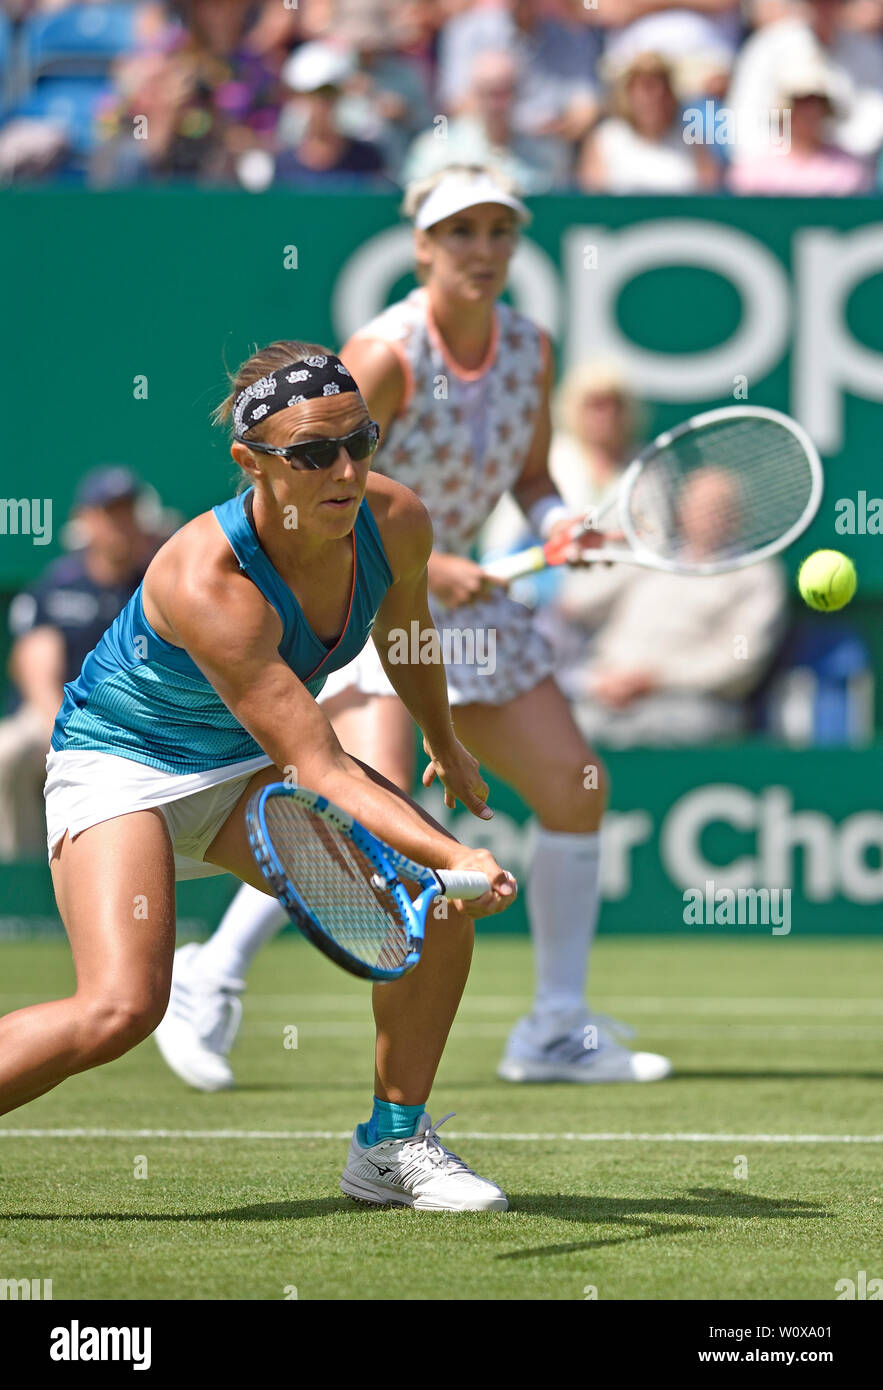 Kirsten Flipkens (Ned - sunglasses) and Bethanie Mattek-Sands (USA) playing  in the semi final of the ladies doubles at the Nature Valley International  tennis at Devonshire Park, Eastbourne, UK. 28th June, 2019